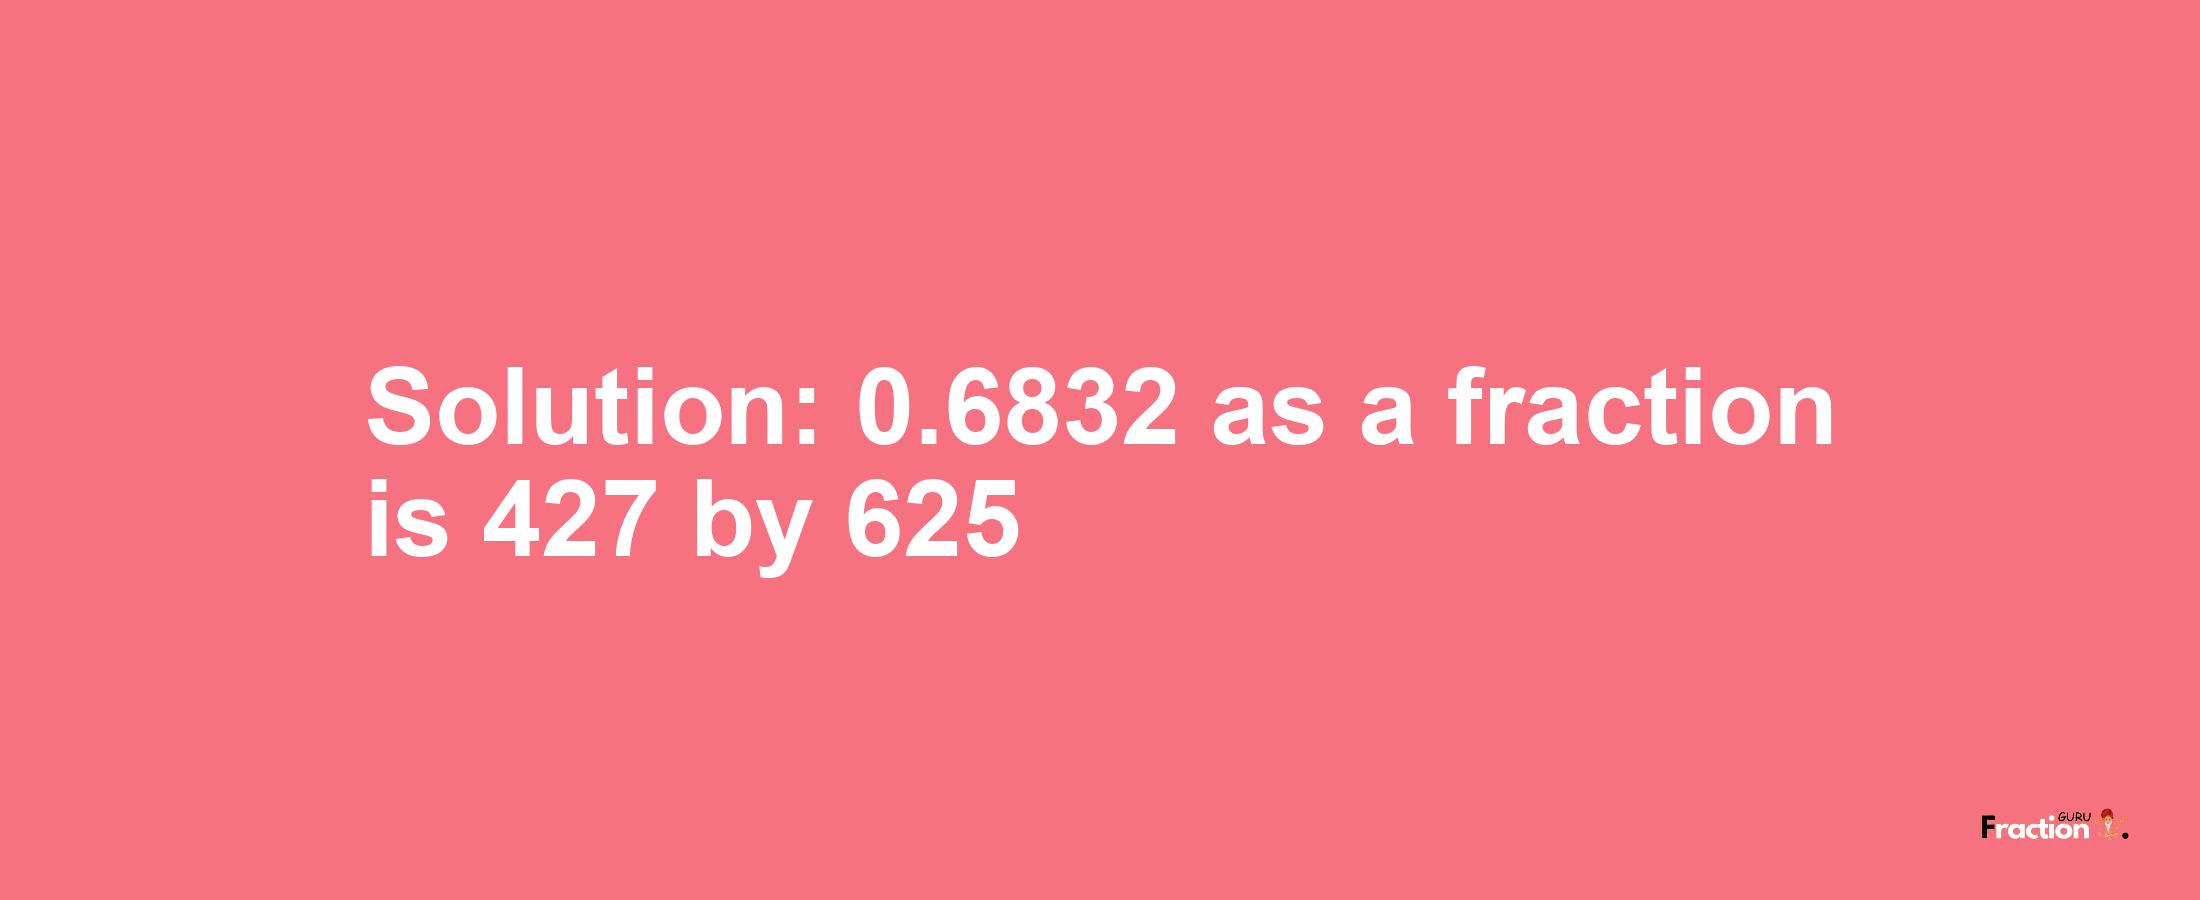 Solution:0.6832 as a fraction is 427/625